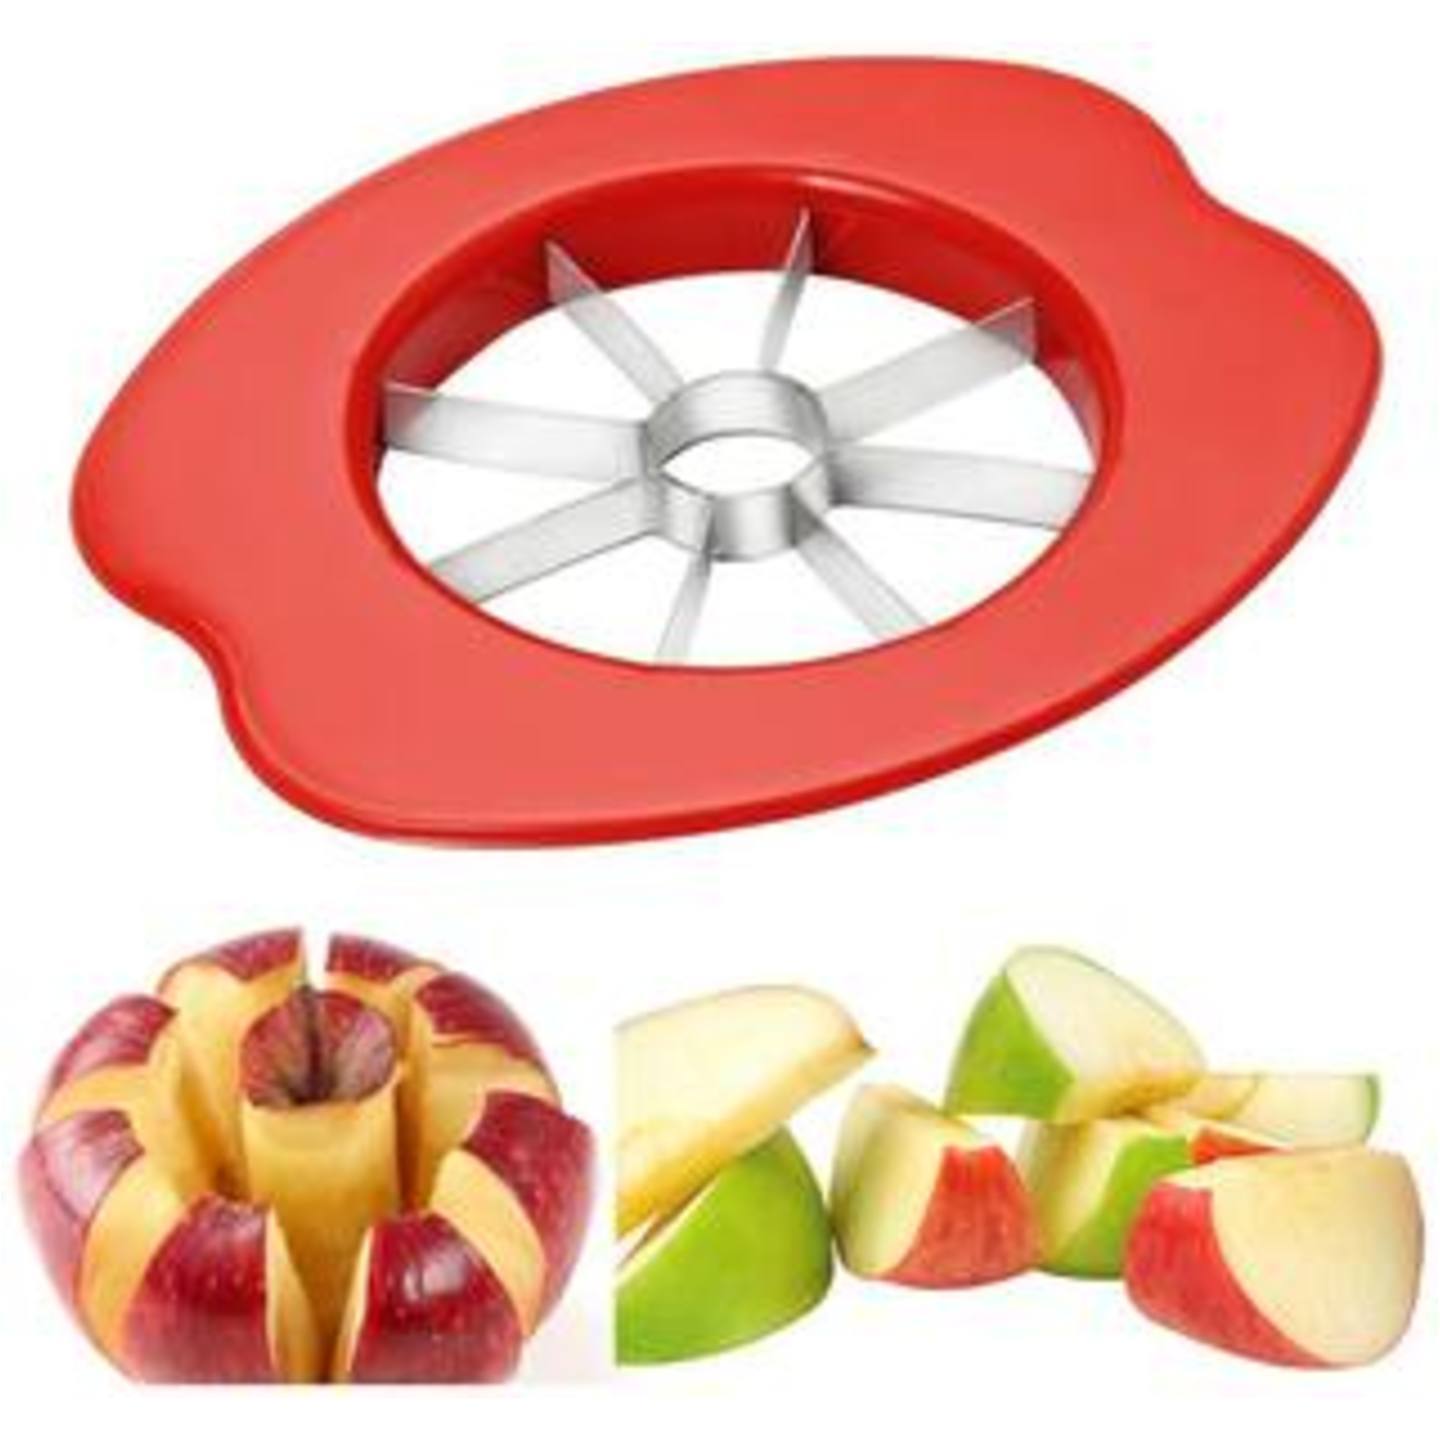 Apple cutter with stainless steel blades